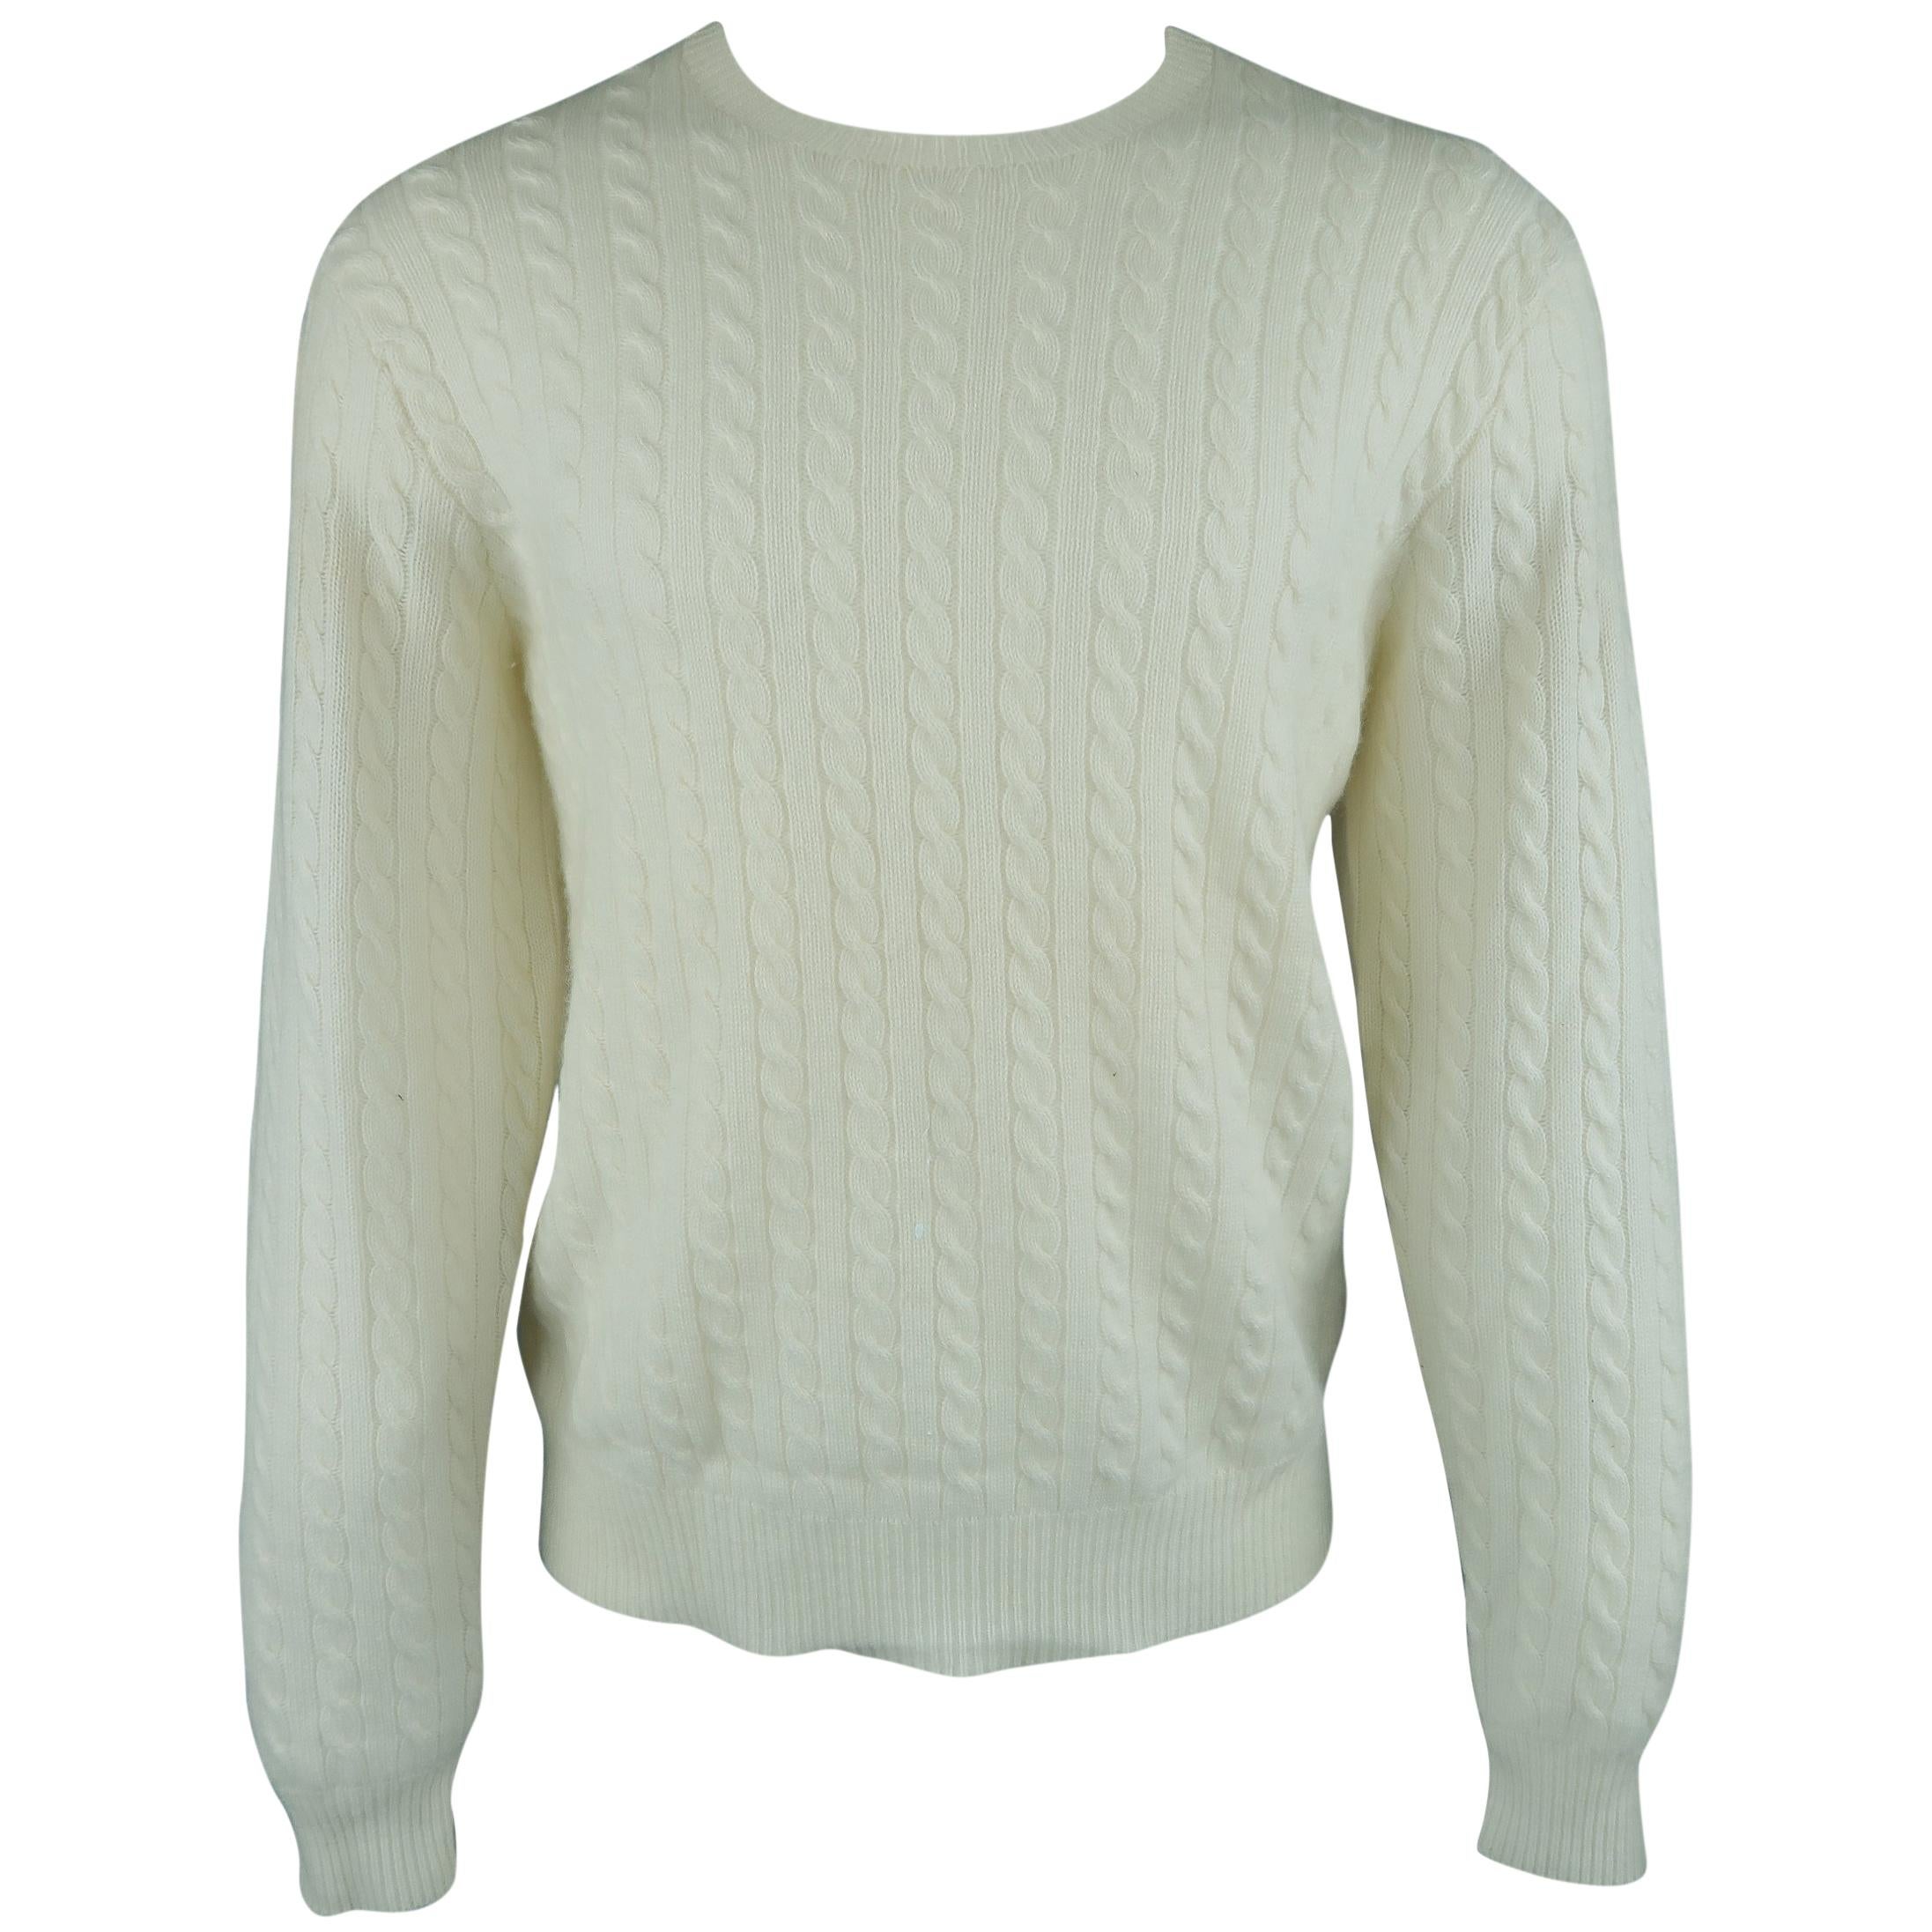 Ralph Lauren Off White Cable Knit Cashmere Sweater